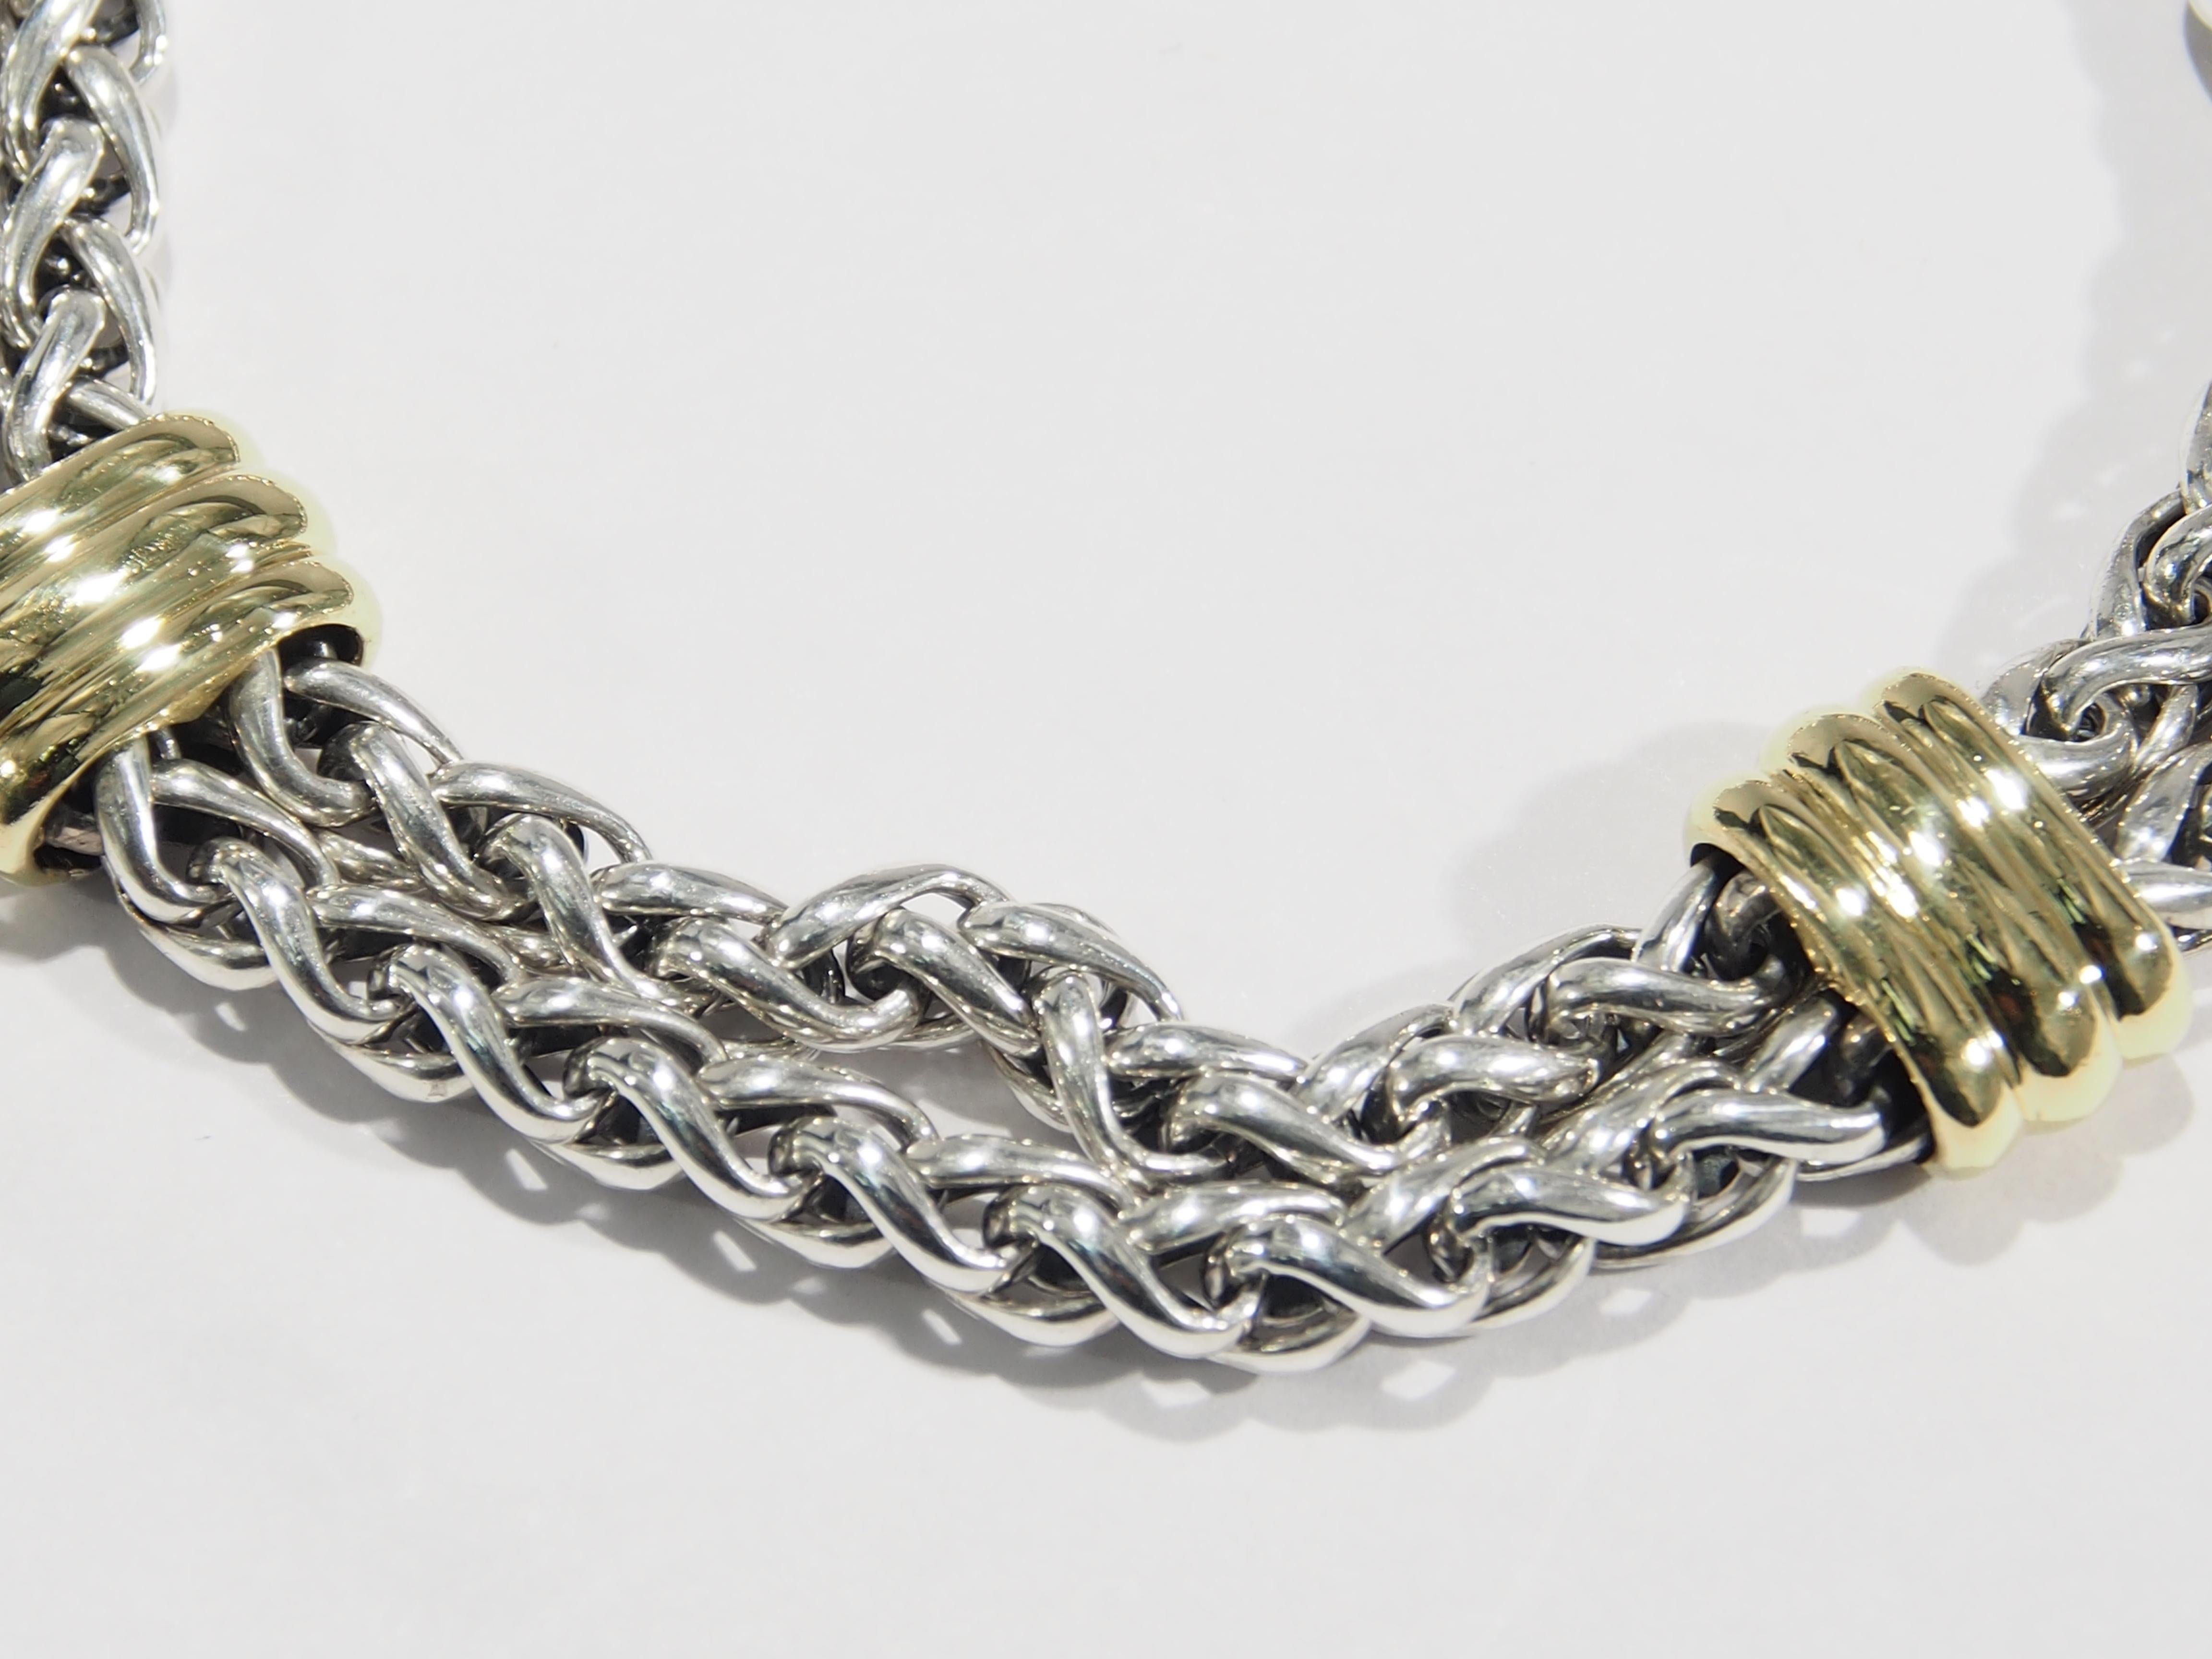 From one of America's favorite jewelry designer, David Yurman is this Wheat Link Bracelet. This compelling Bracelet is fashioned in a Double Strand Wheat Link accented with (2) 18K Yellow Gold Bars for an approximate width of 14mm. The Bracelet has